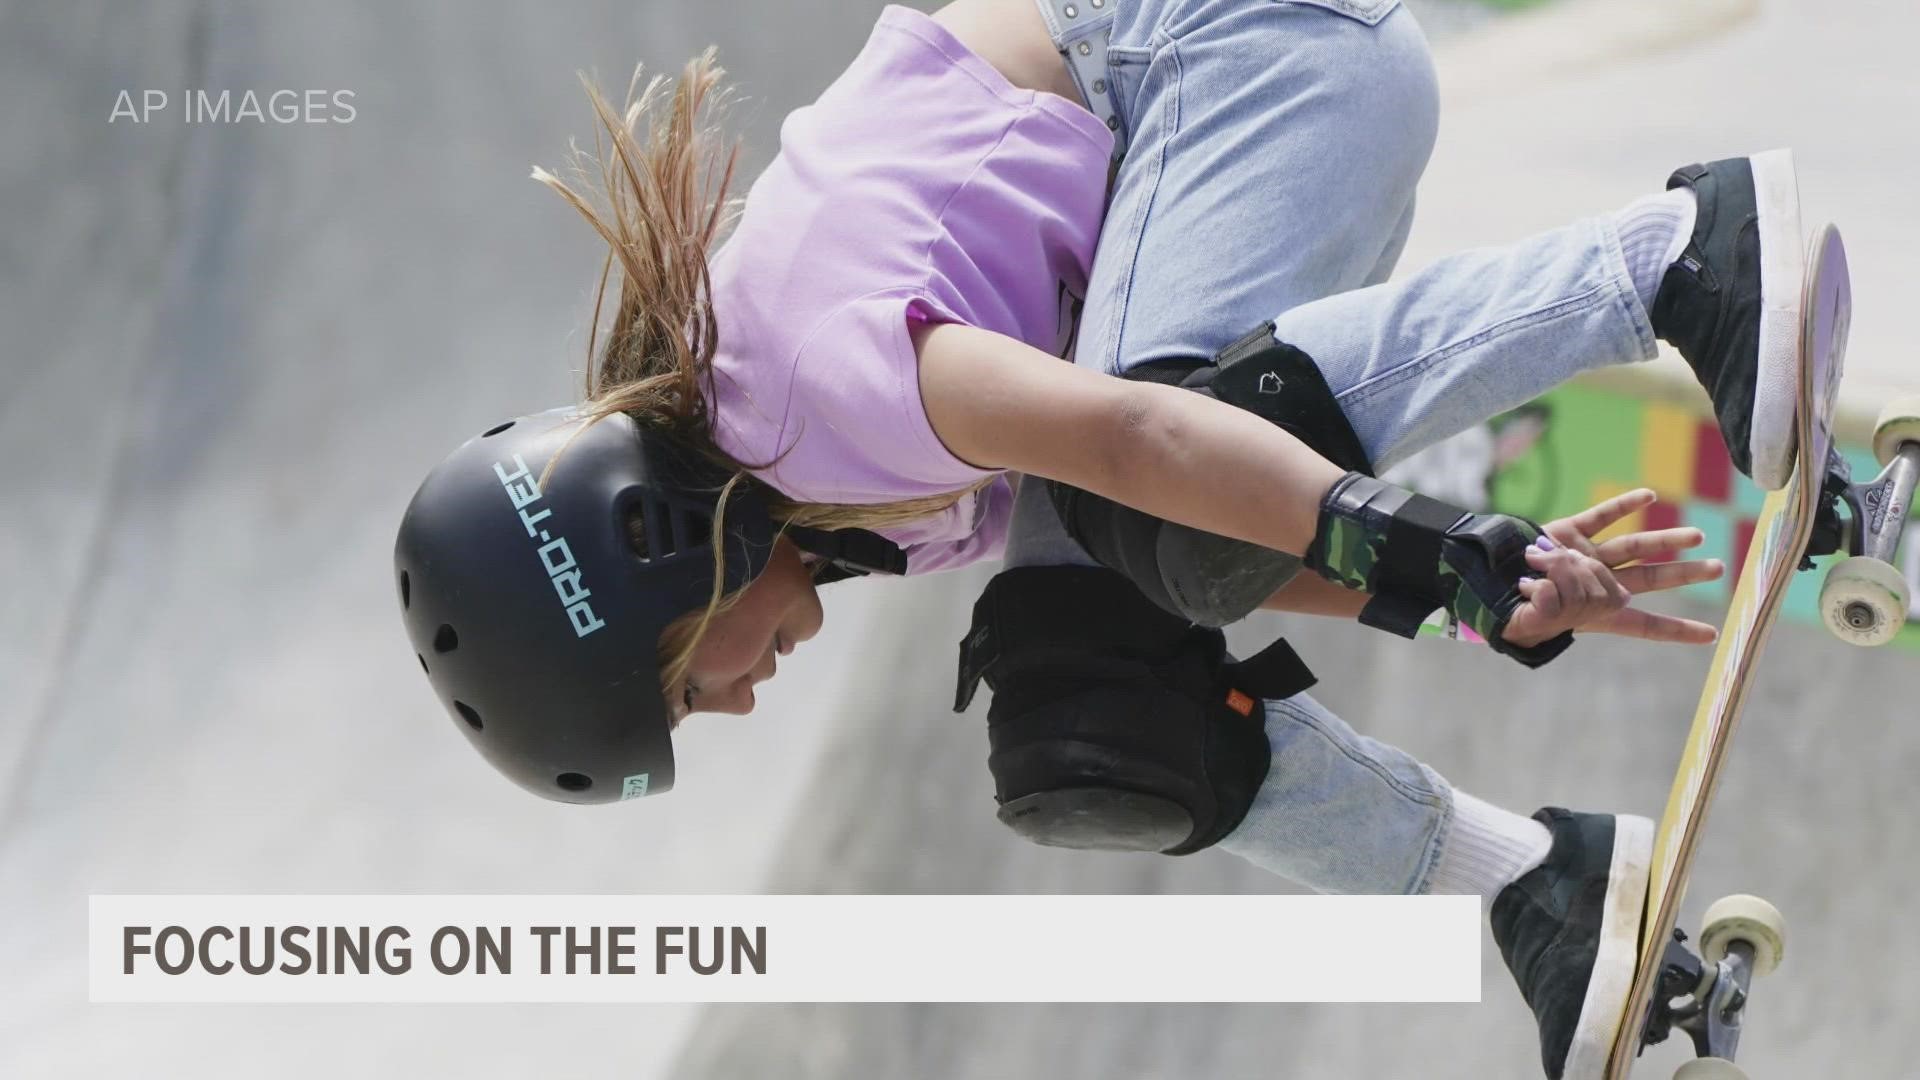 At 14-years-old, Sky Brown is an Olympic bronze medalist and won silver at Dew Tour in 2021.